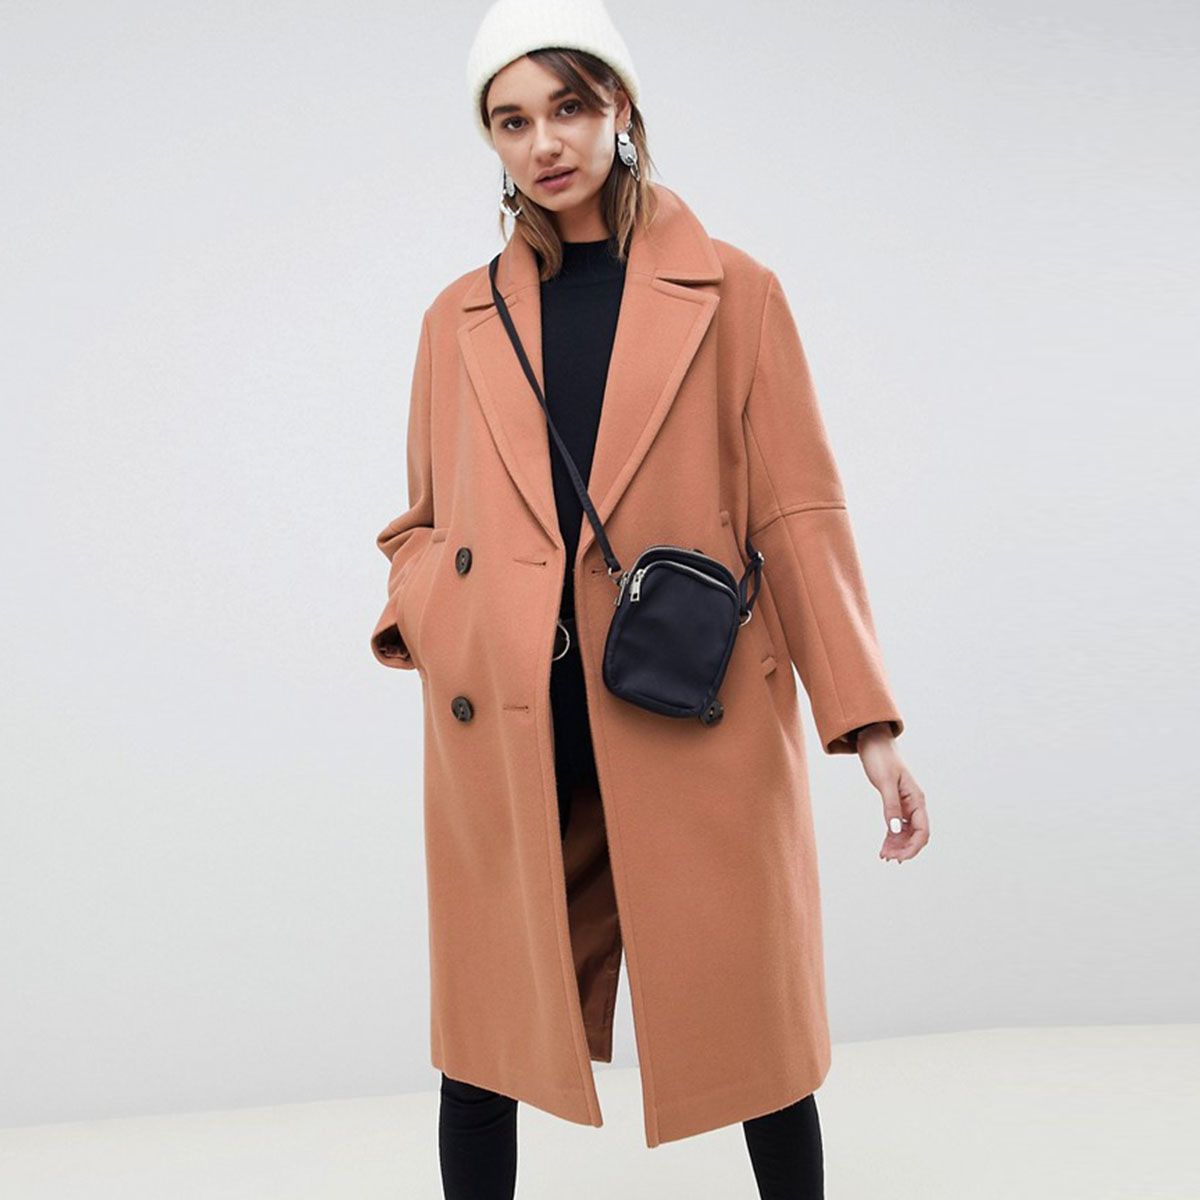 Best ASOS Coats: 21 Great Styles to Last All Winter Long | Who What Wear